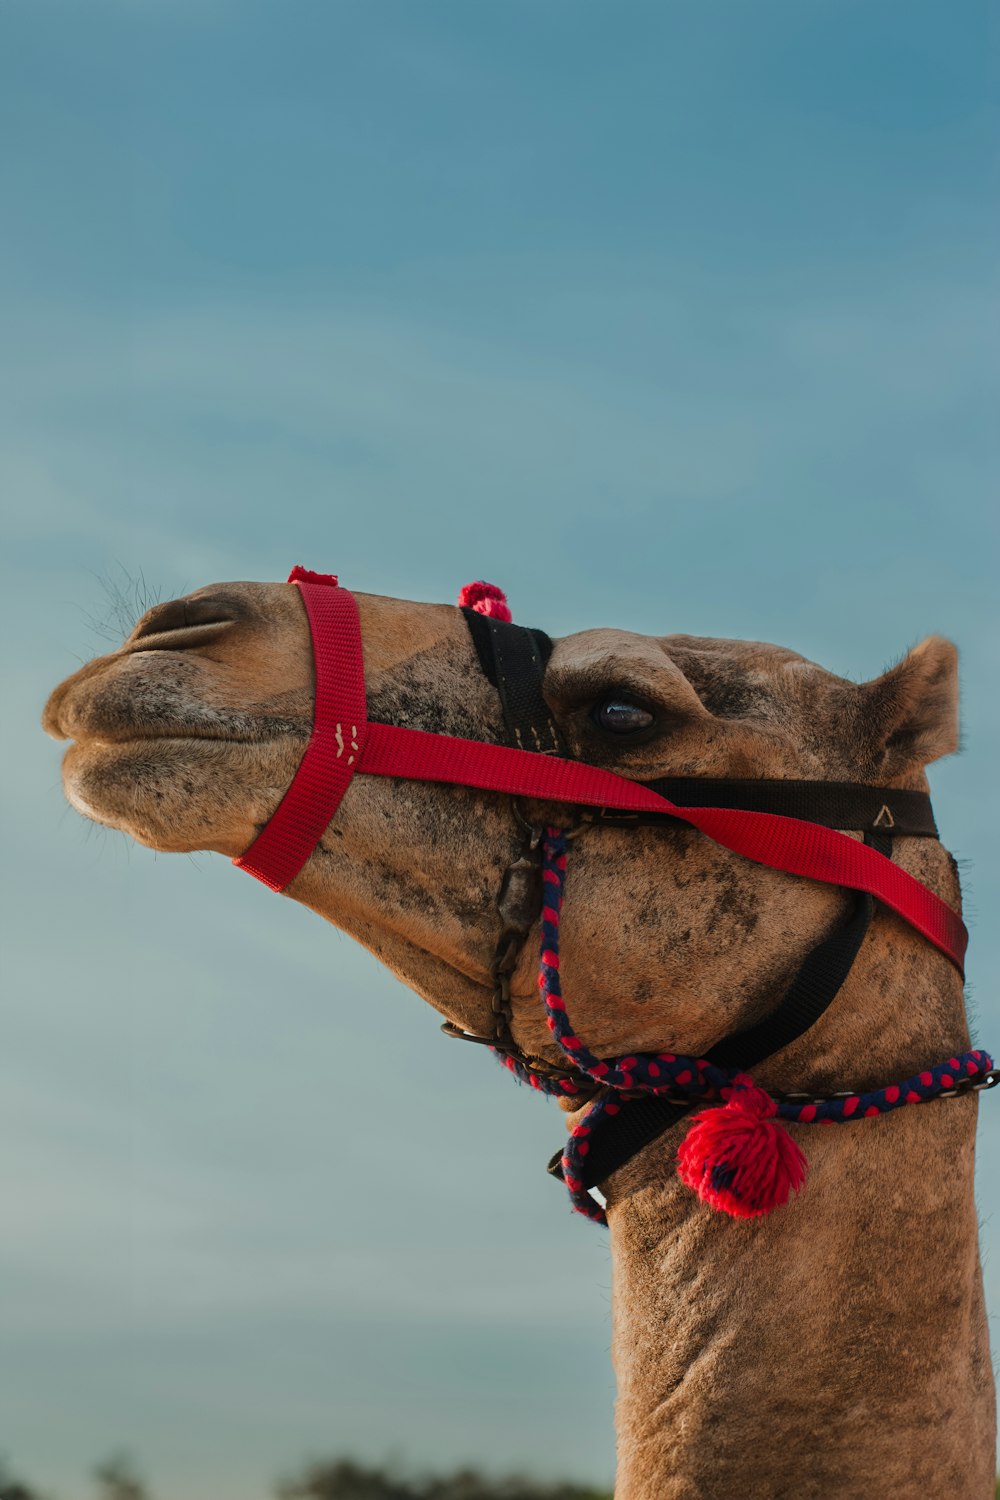 a close up of a camel wearing a harness